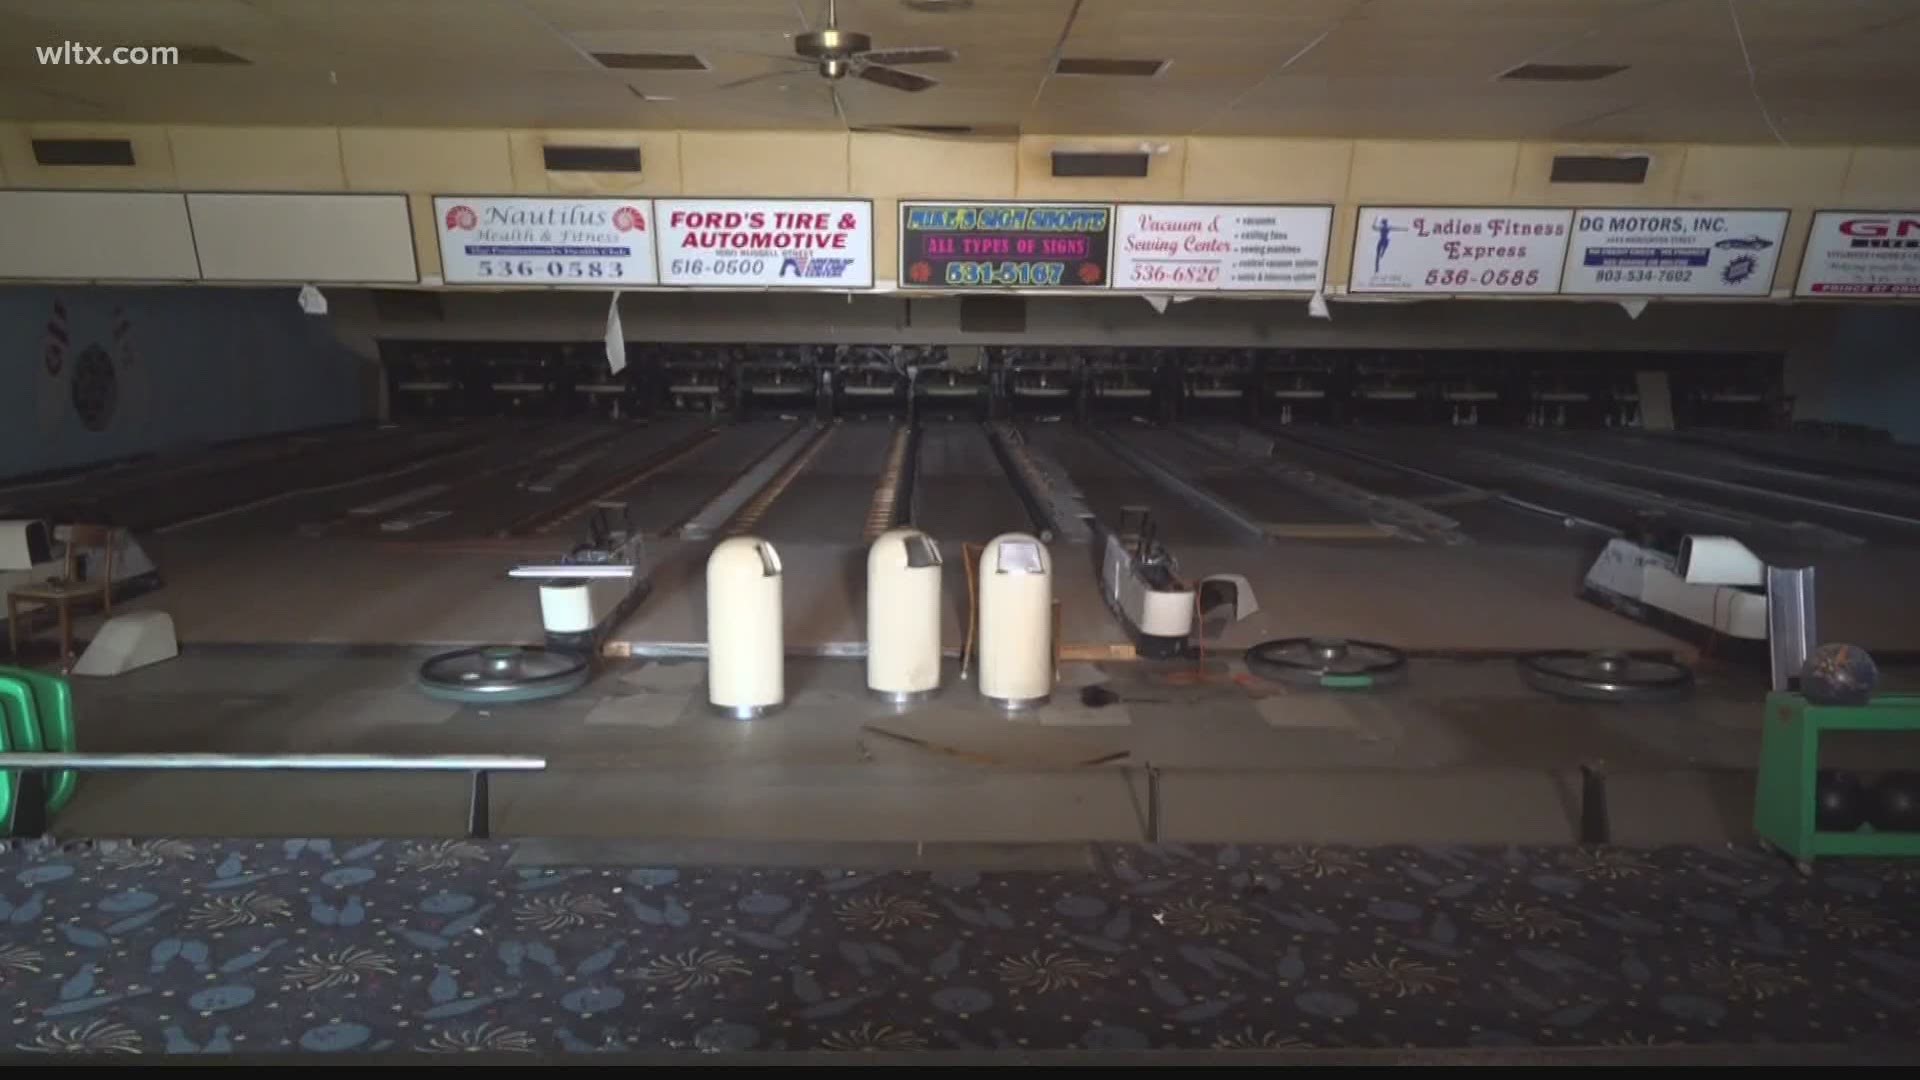 Orangeburg looks to make historic bowling alley into Justice Center